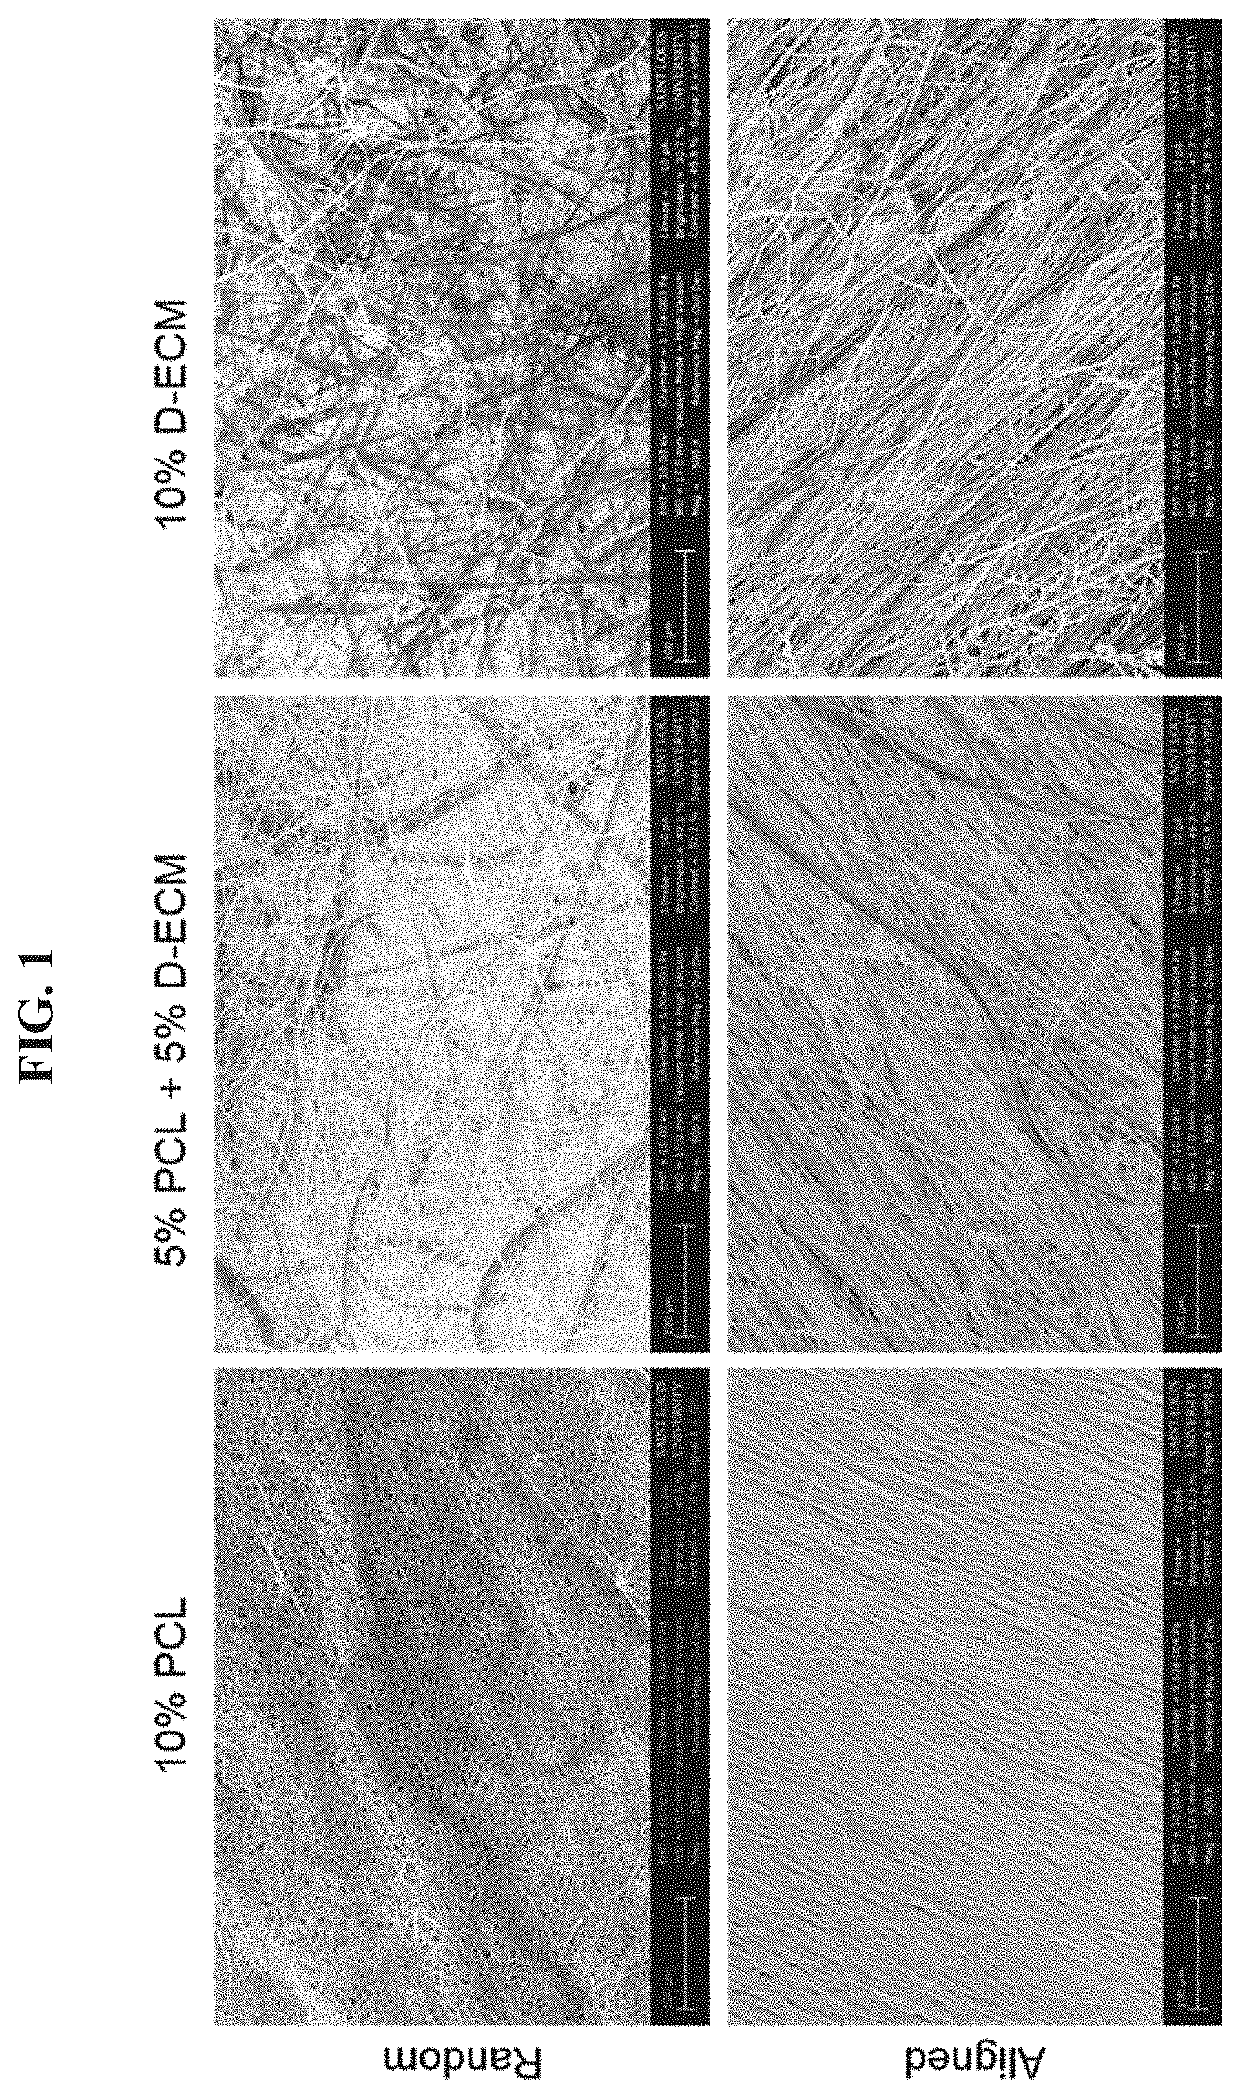 Aligned electrospun matrices of decellularized muscle for tissue regeneration